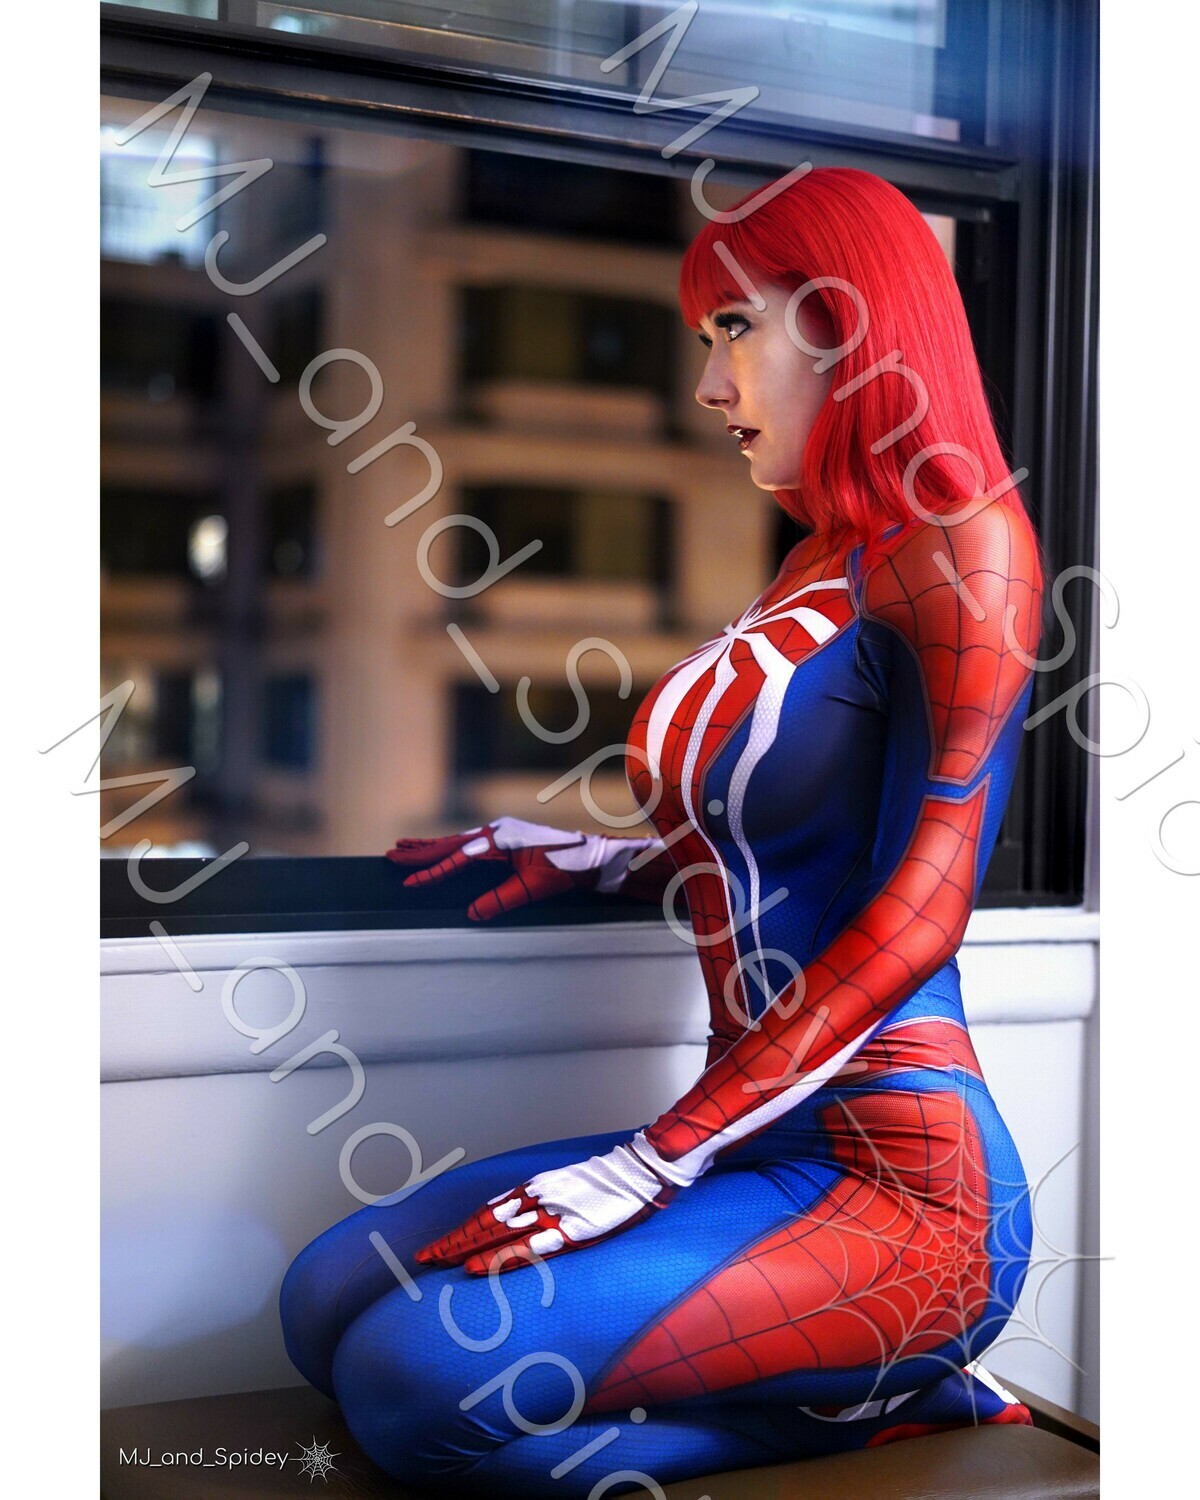 Marvel - Spider-Man - Mary Jane Watson - PS4 Insomniac Spider-Suit No. 1 - 8x10 Cosplay Print (@MJ_and_Spidey, MJ and Spidey, Comics)